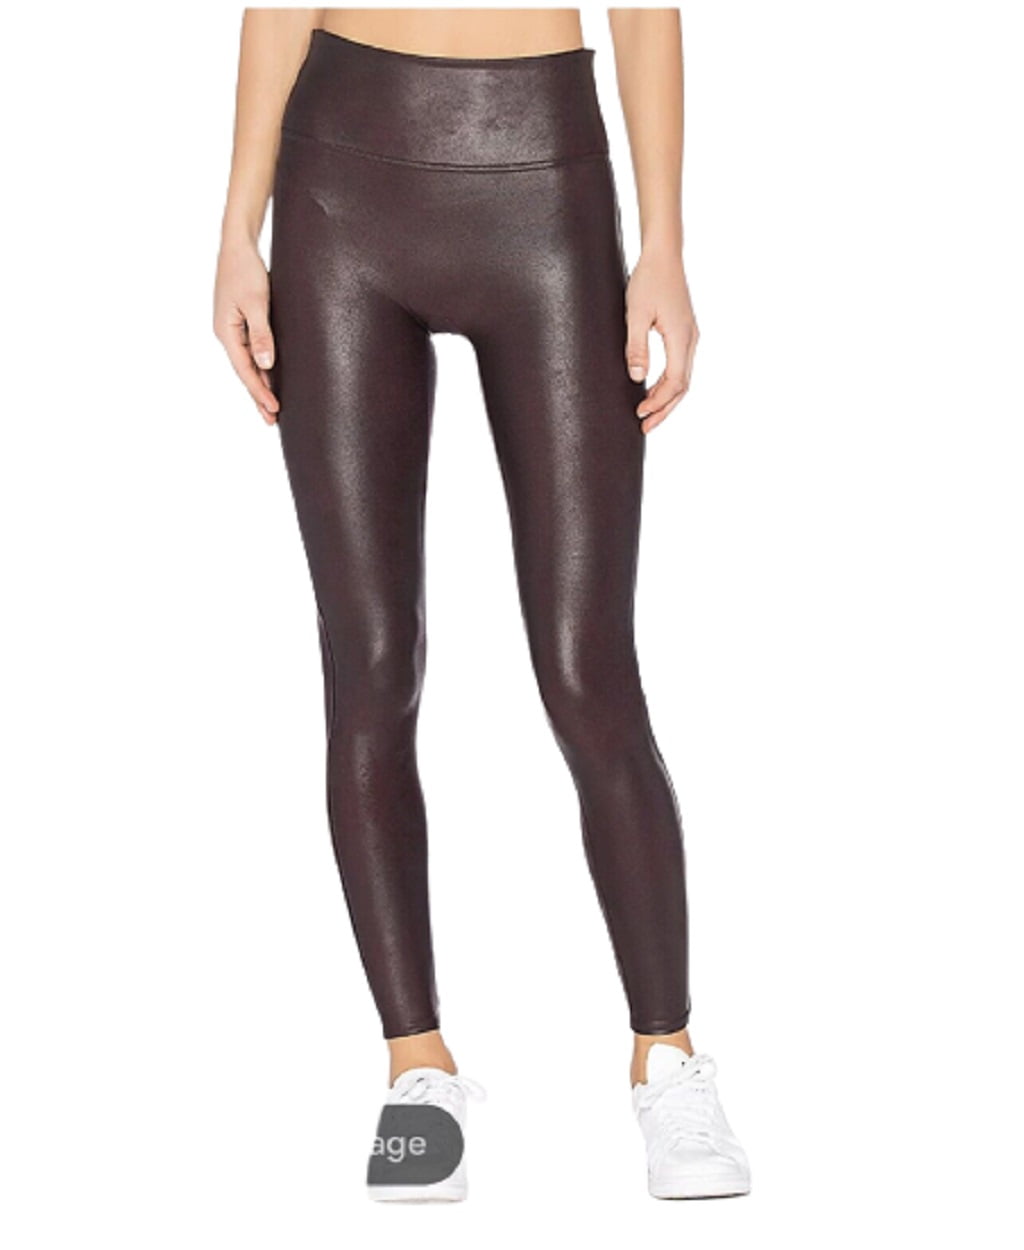 Vera Wang High Rise Stretch Faux Leather Leggings Size 2x Black SHPG for  sale online